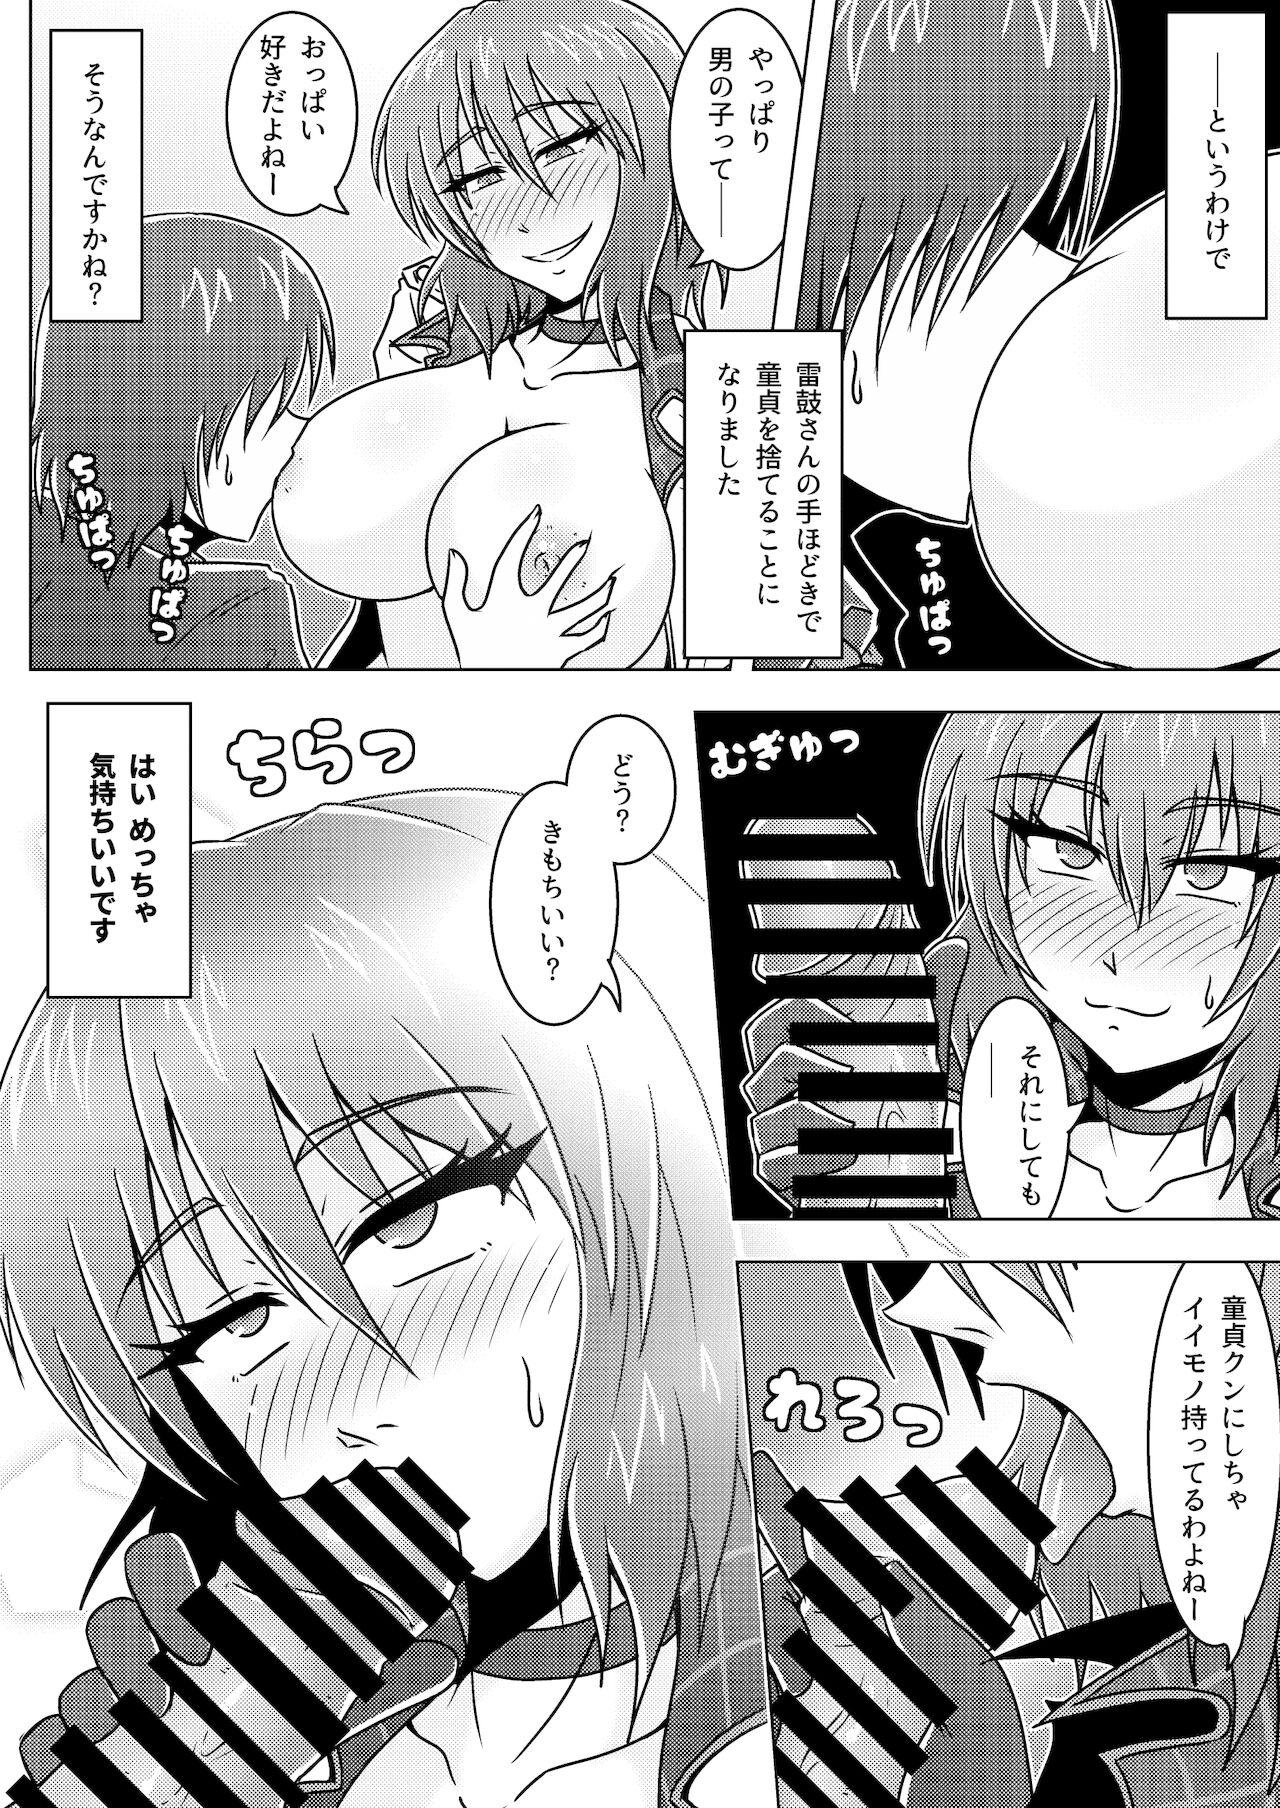 Mujer 雷鼓さんはお酒を控えない - Touhou project Hairy - Page 3